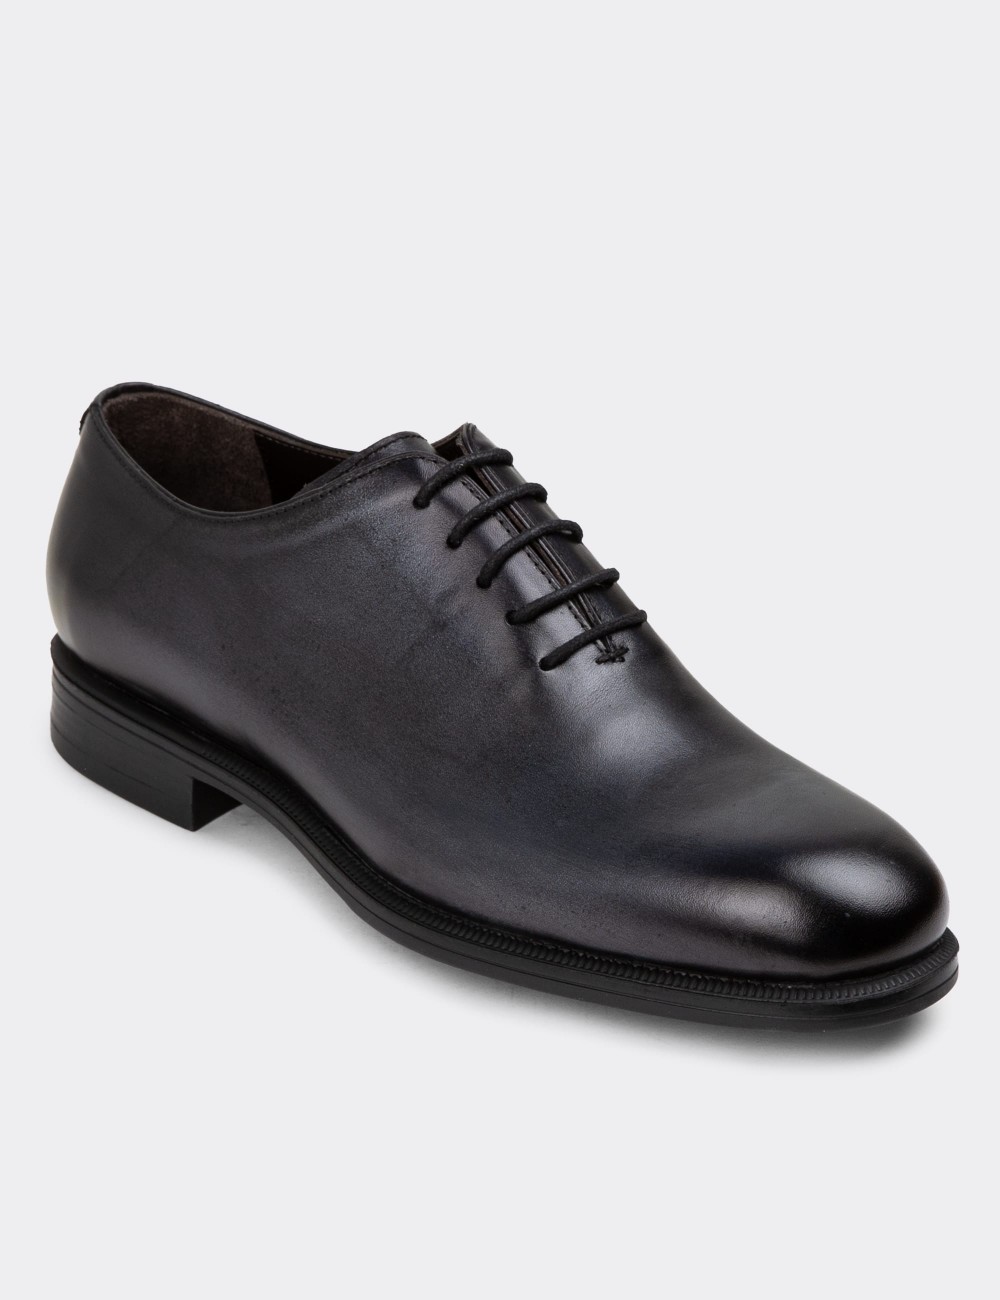 Anthracite Leather Classic Shoes - 01830MANTC01